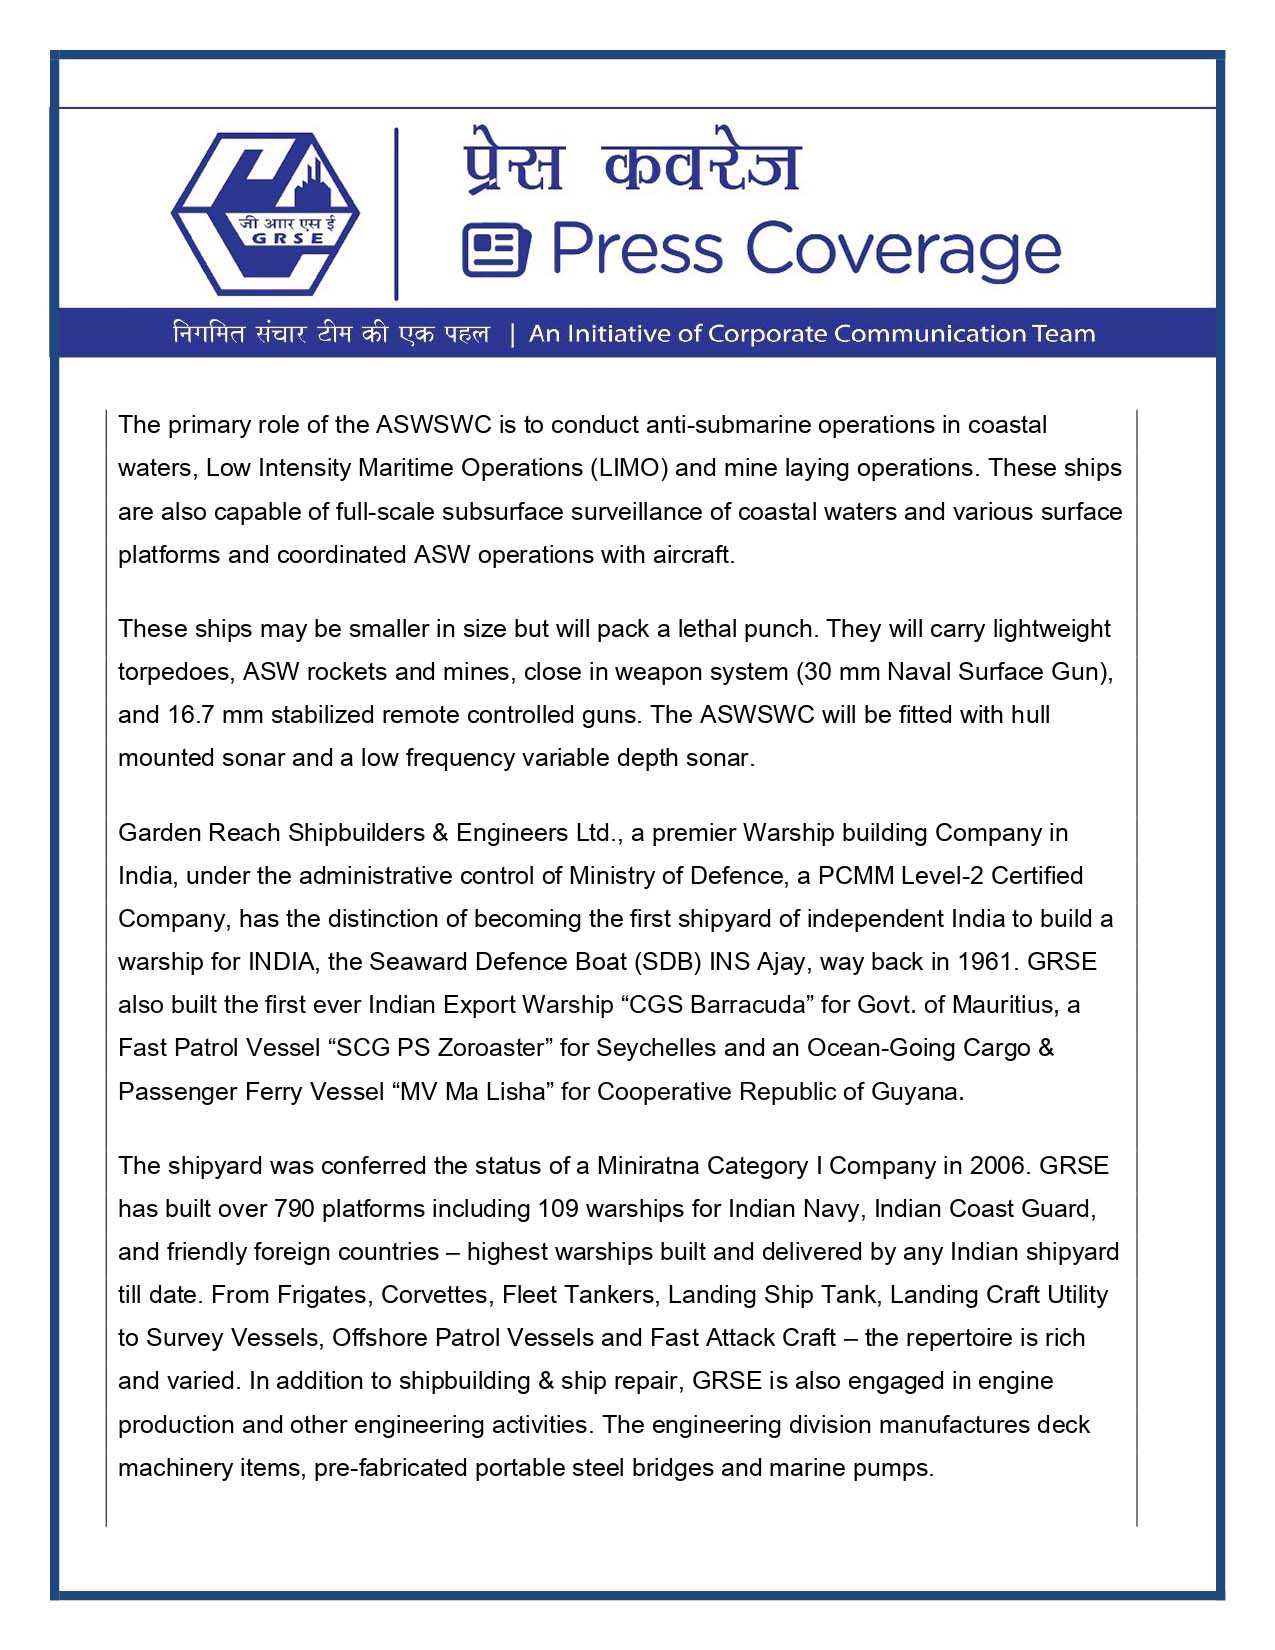 Press Coverage : Raksha Anirveda, 10 May 24 : GRSE Lays Keel of the Last in Series (Yard 3034) of Eight ASWSWCs